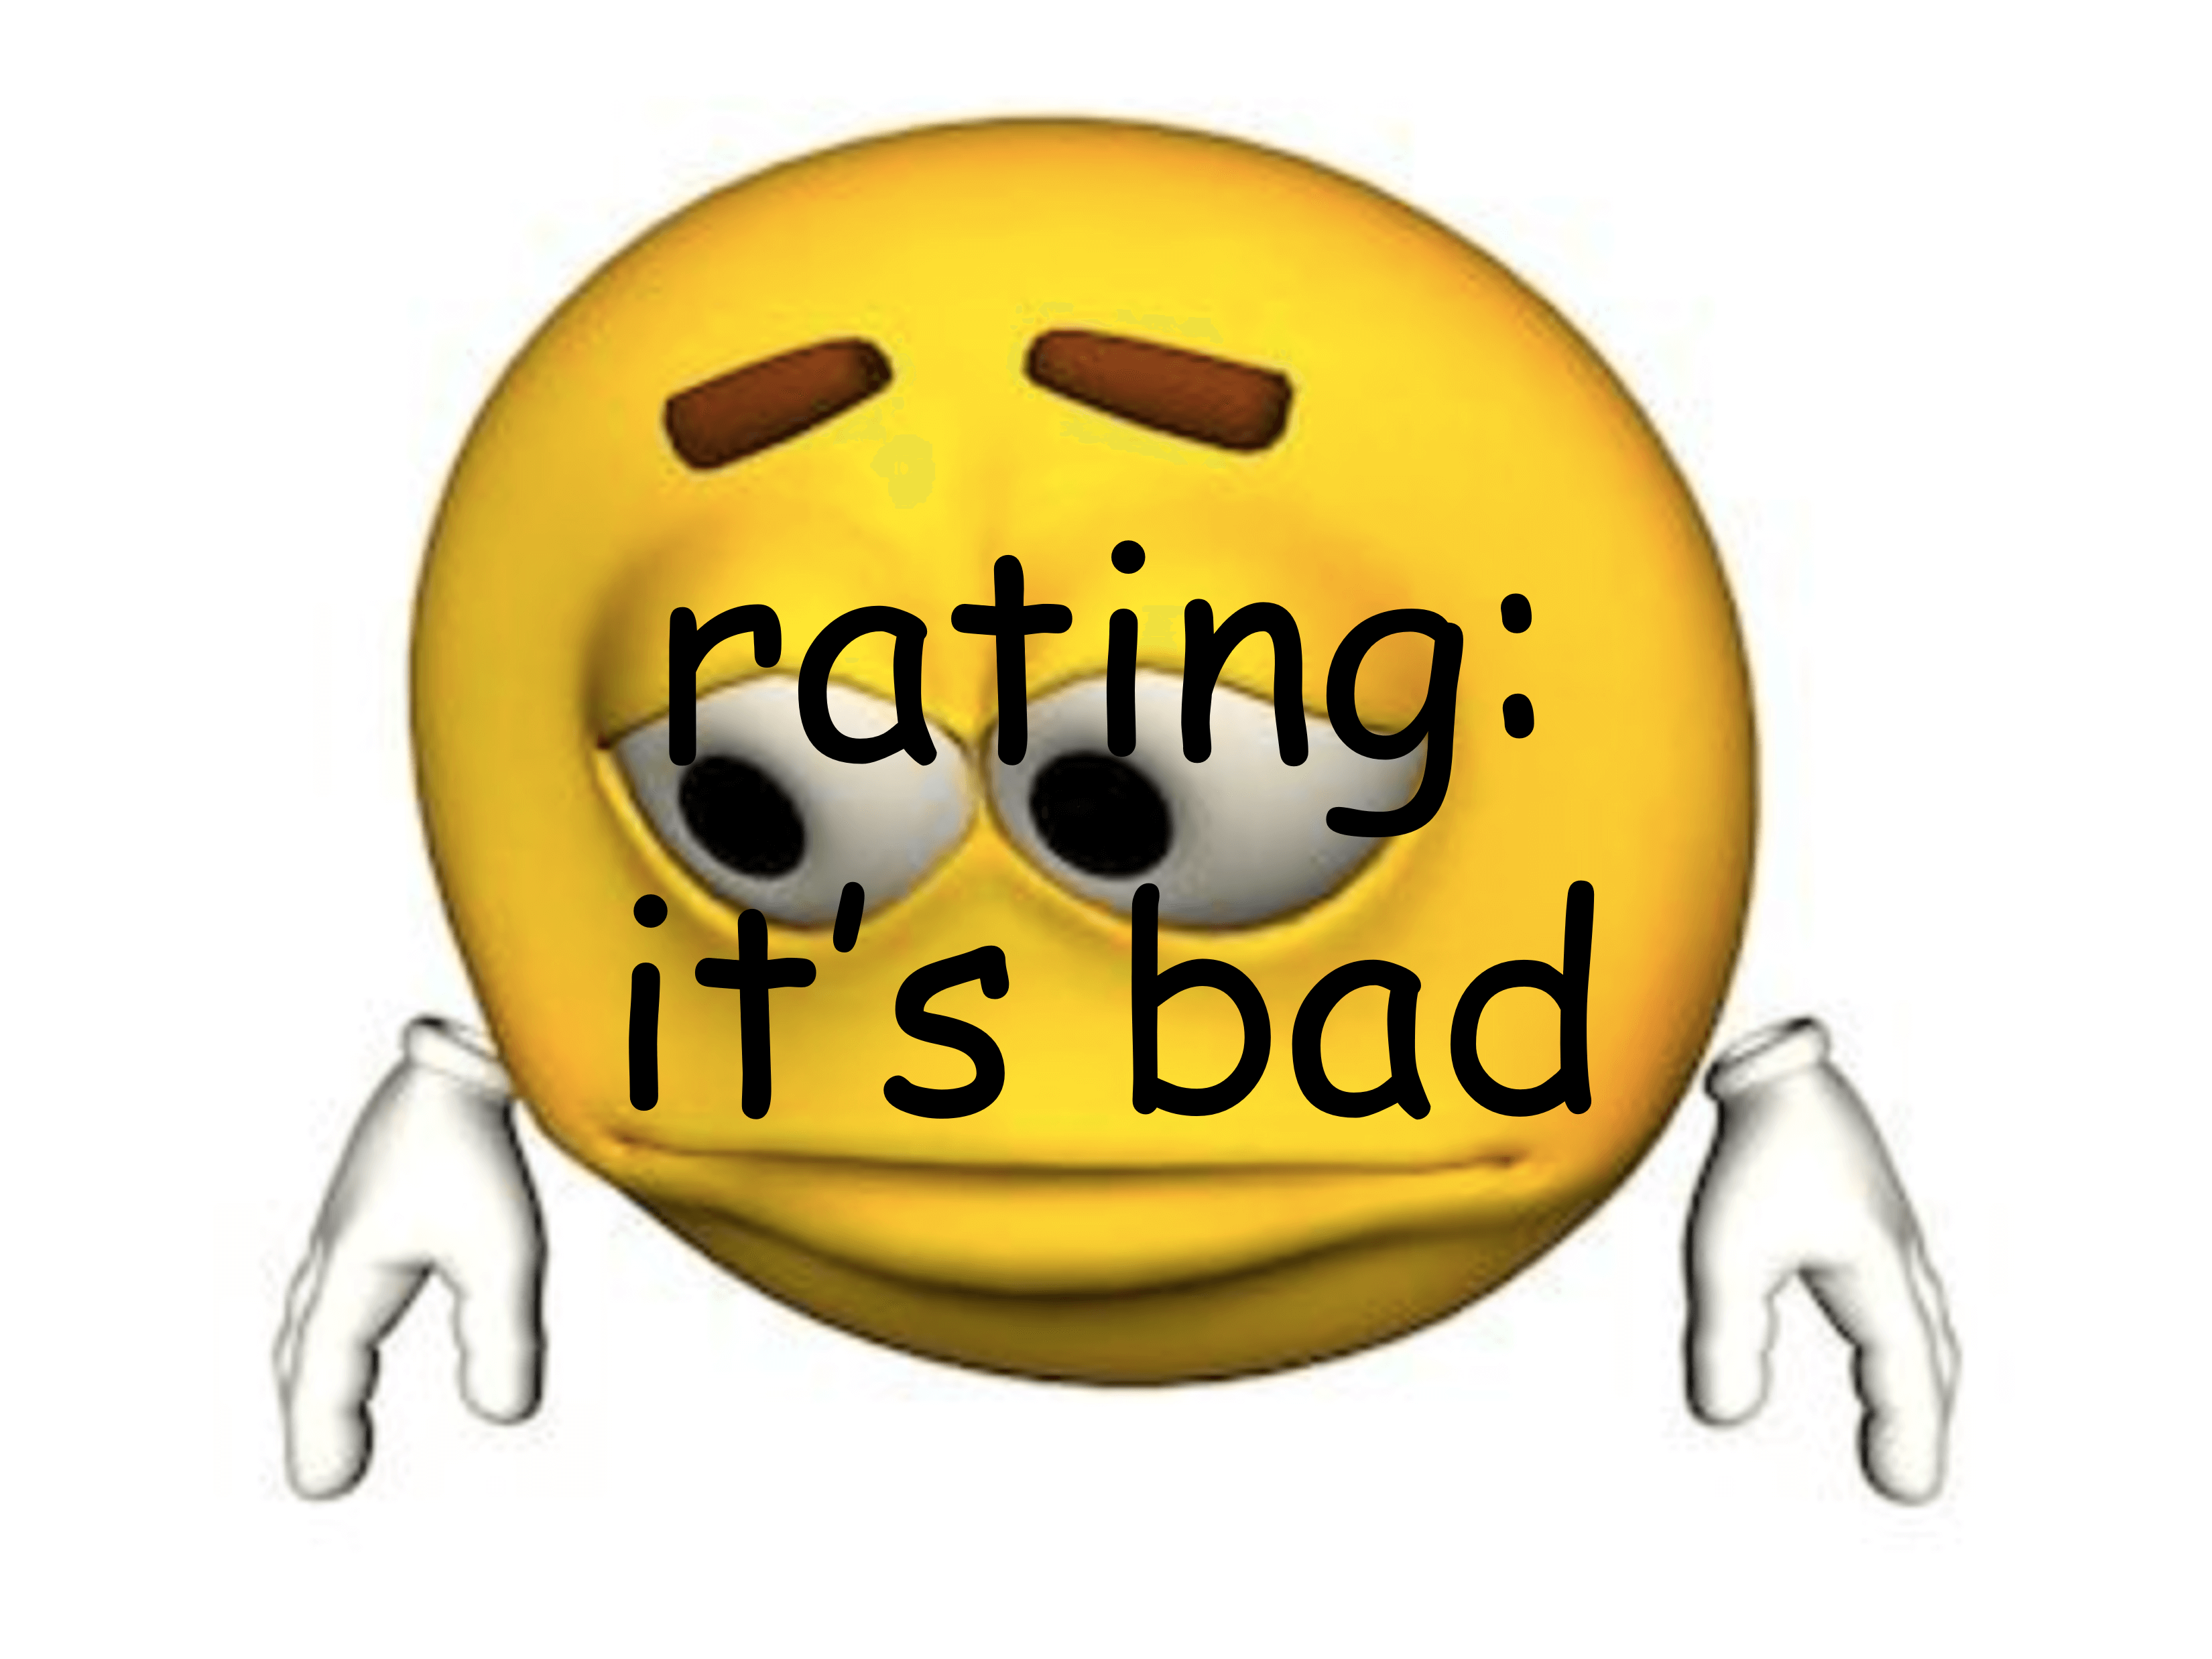 A picture of a yellow emoji looking downward with a sad expression on its face. There is black text over the emoji that says: Rating: It's bad